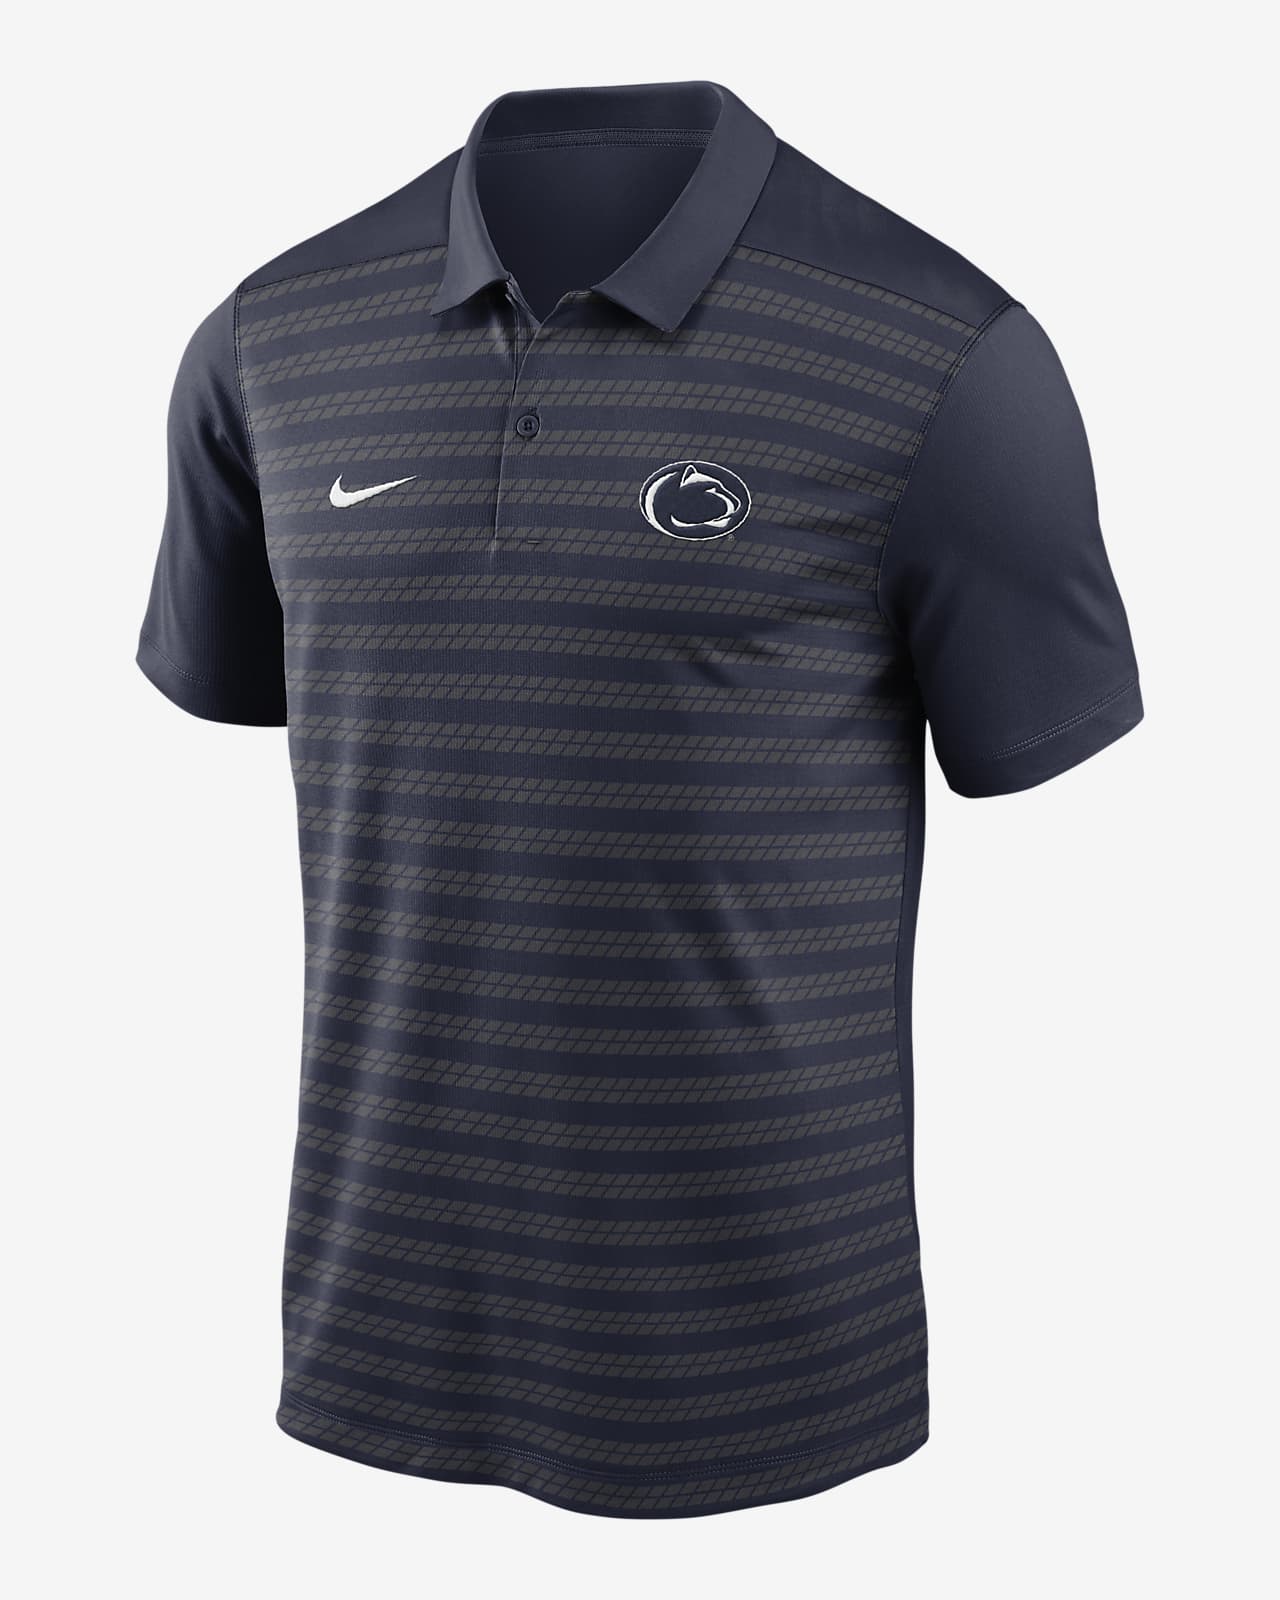 Penn State Nittany Lions Sideline Victory Men's Nike Dri-FIT College Polo